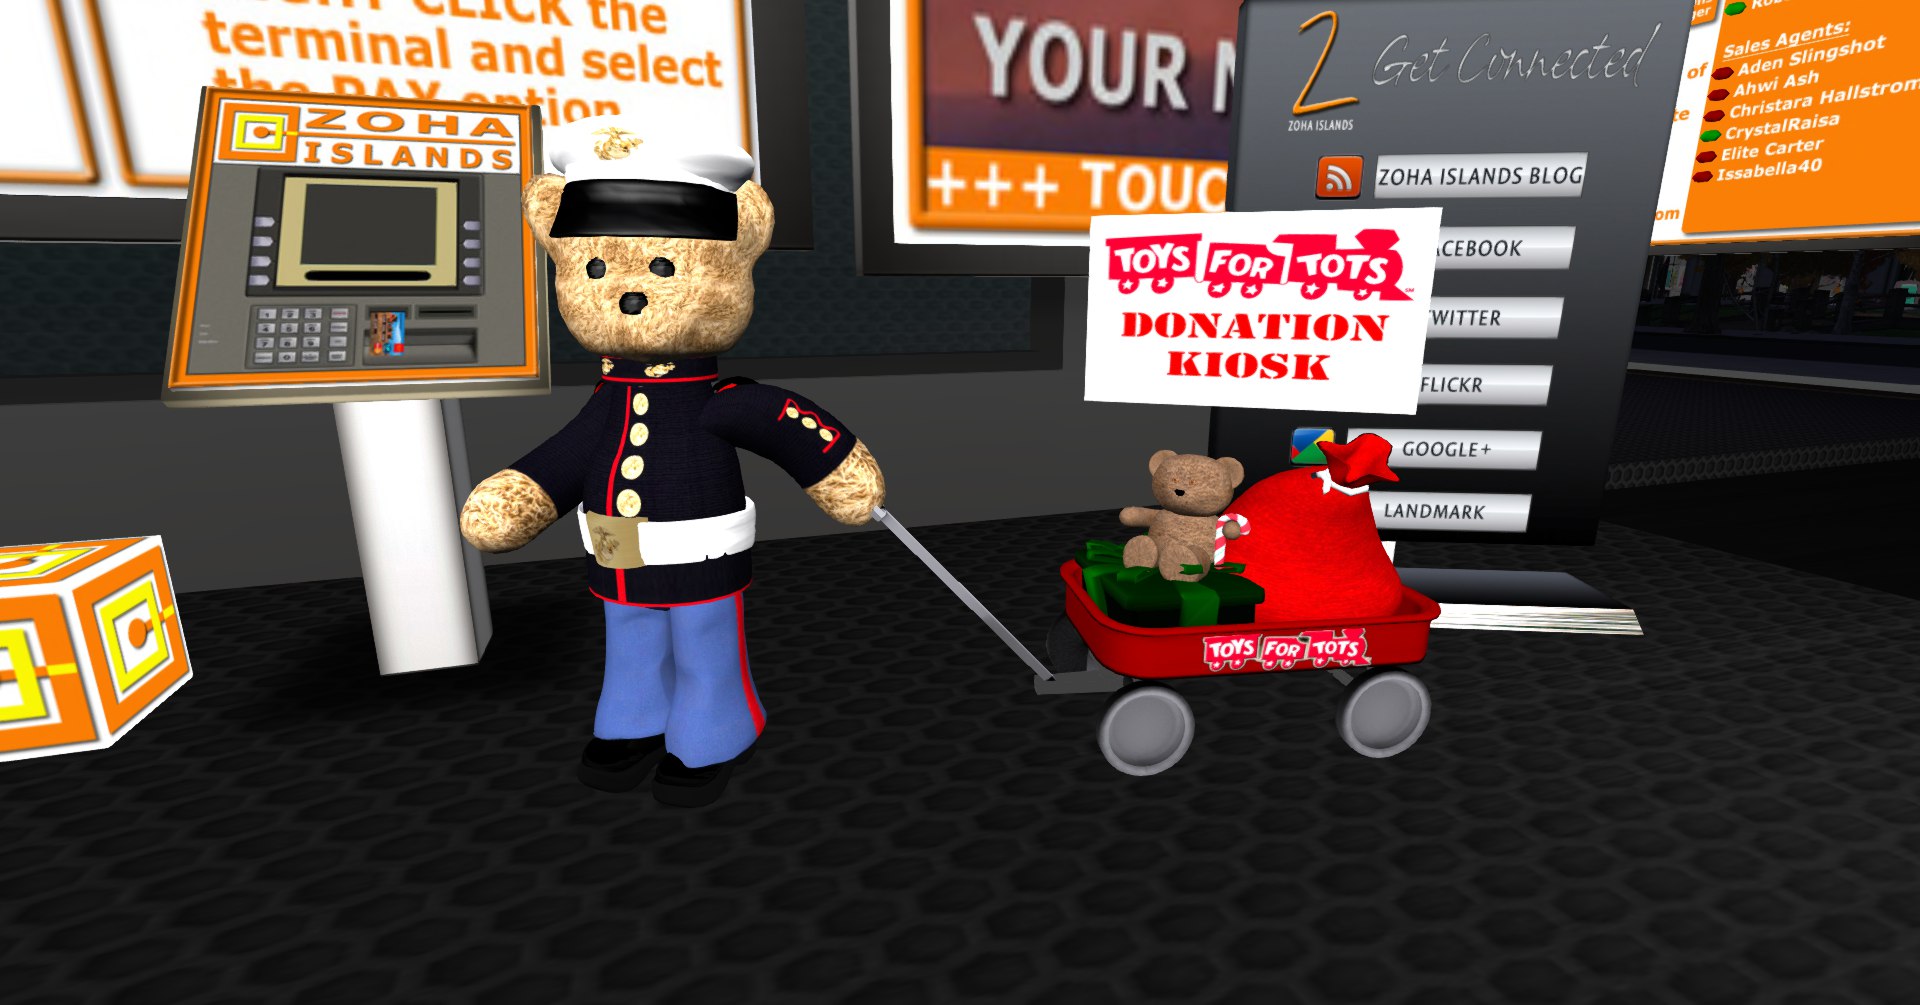 ZoHa Islands Toys for Tots_001